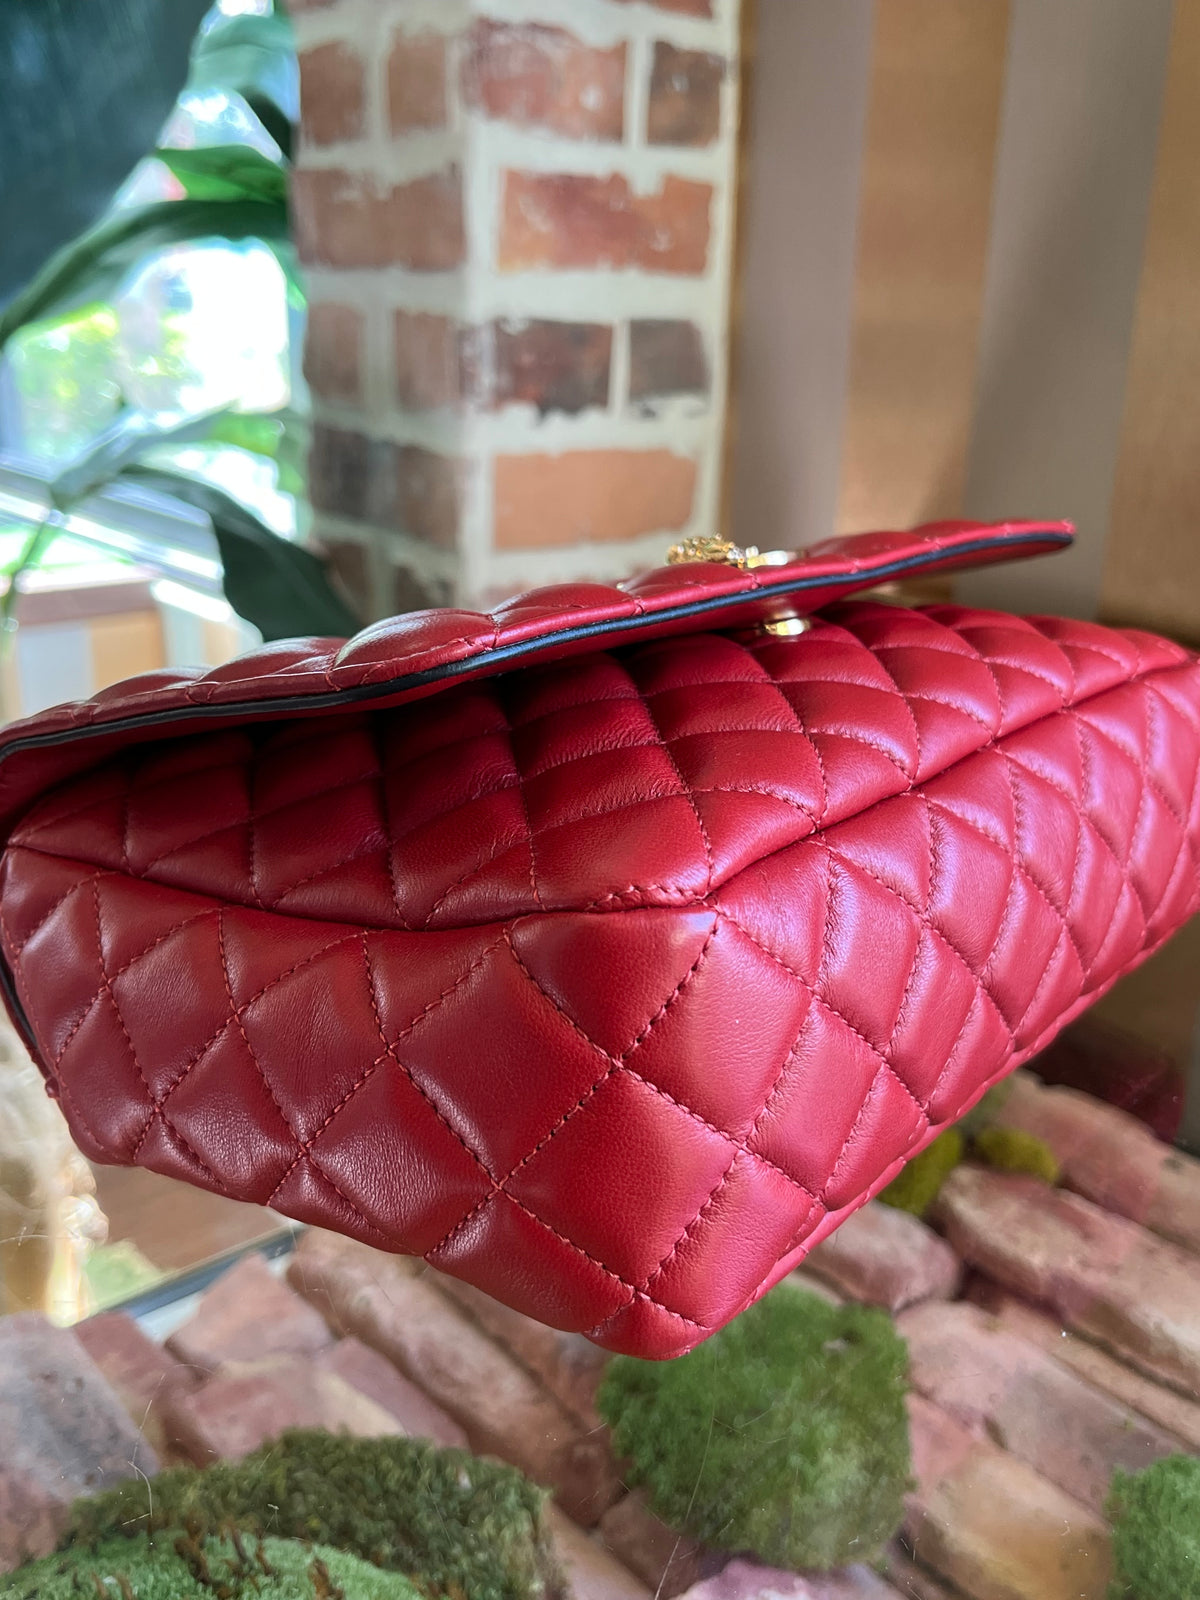 VERSACE Red Quilted Leather Gold Medusa Head Flap crossbody Bag